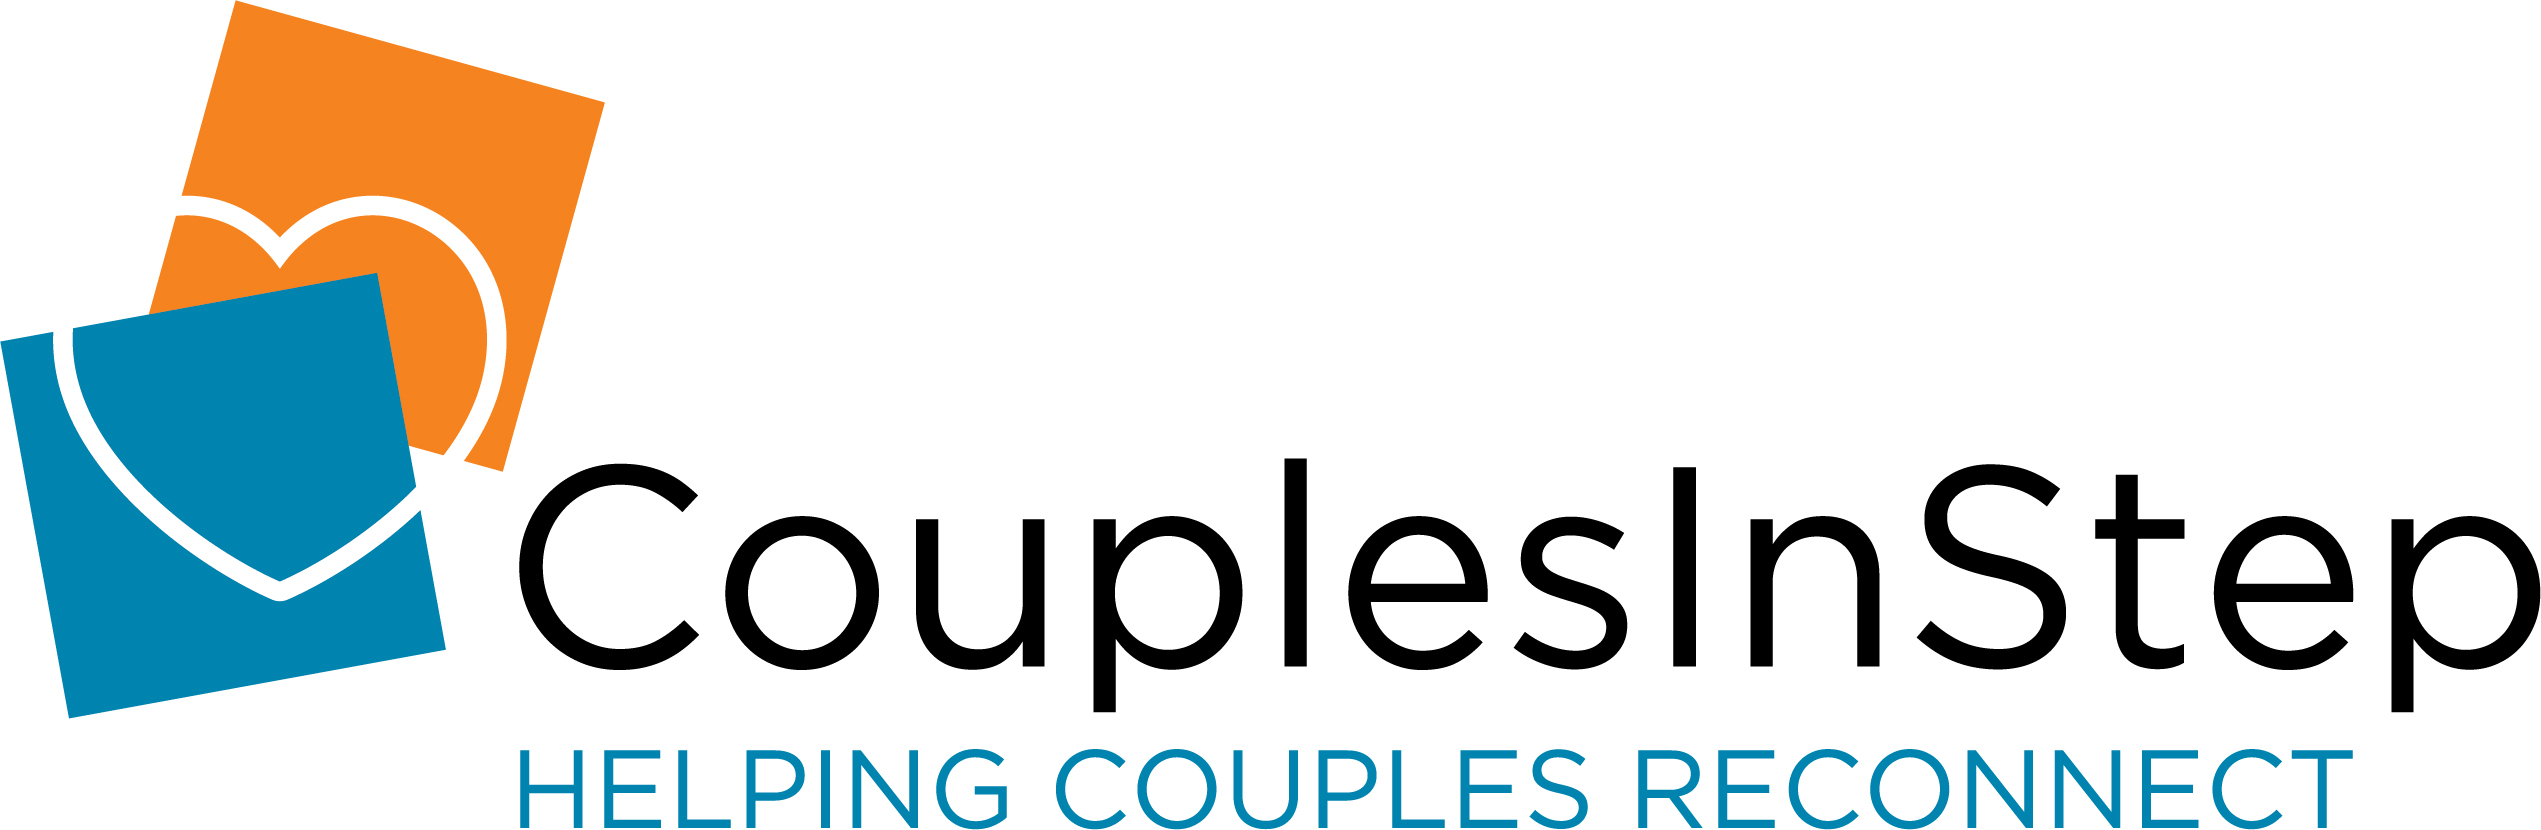 Couples In Step